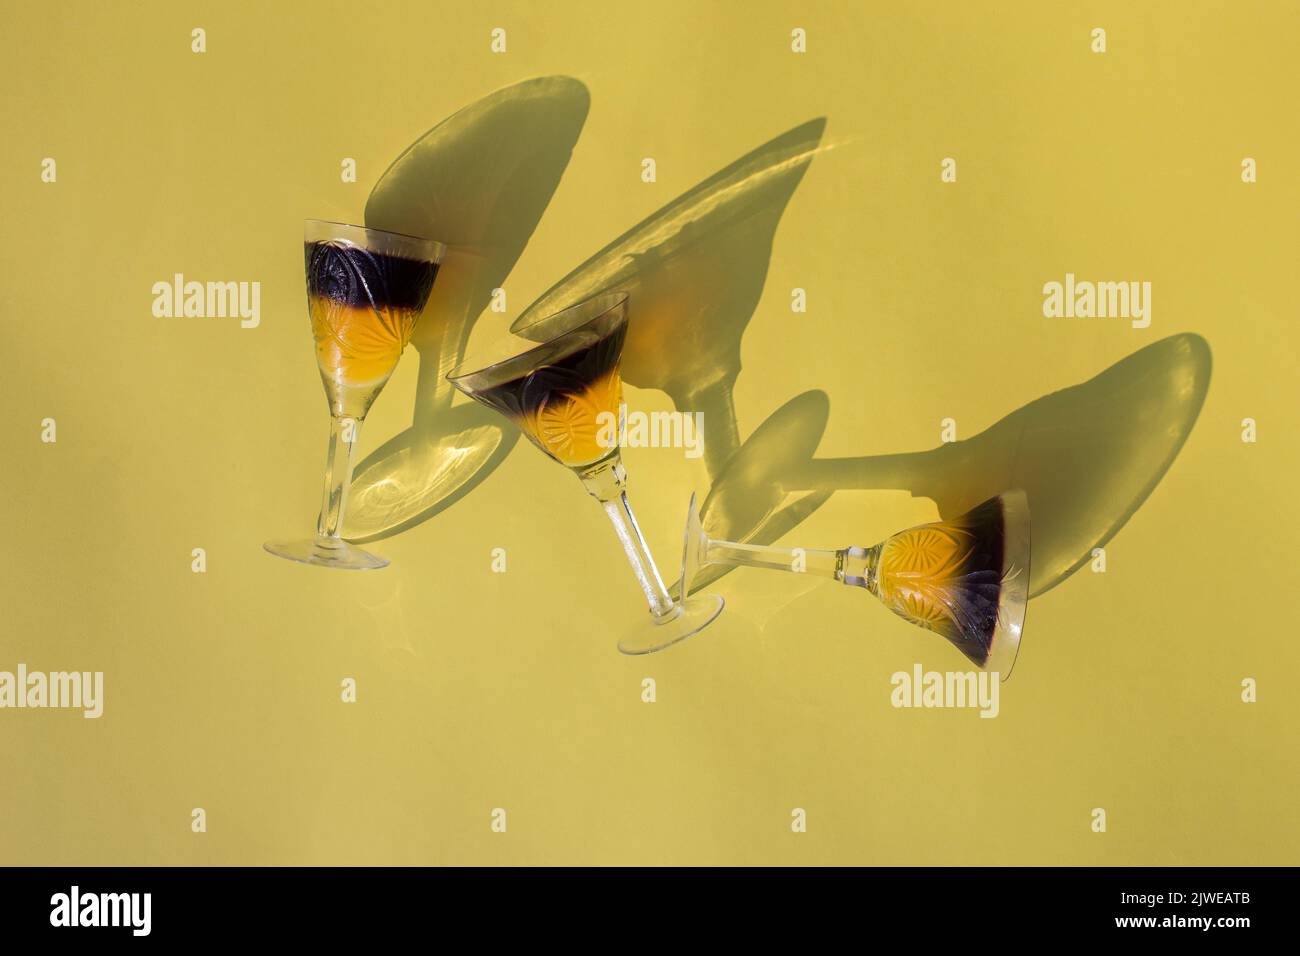 3 crystal glasses with two-color frozen jelly lie on a yellow background, top view. interesting contrasting shadows. Holiday and fun atmosphere. Delic Stock Photo